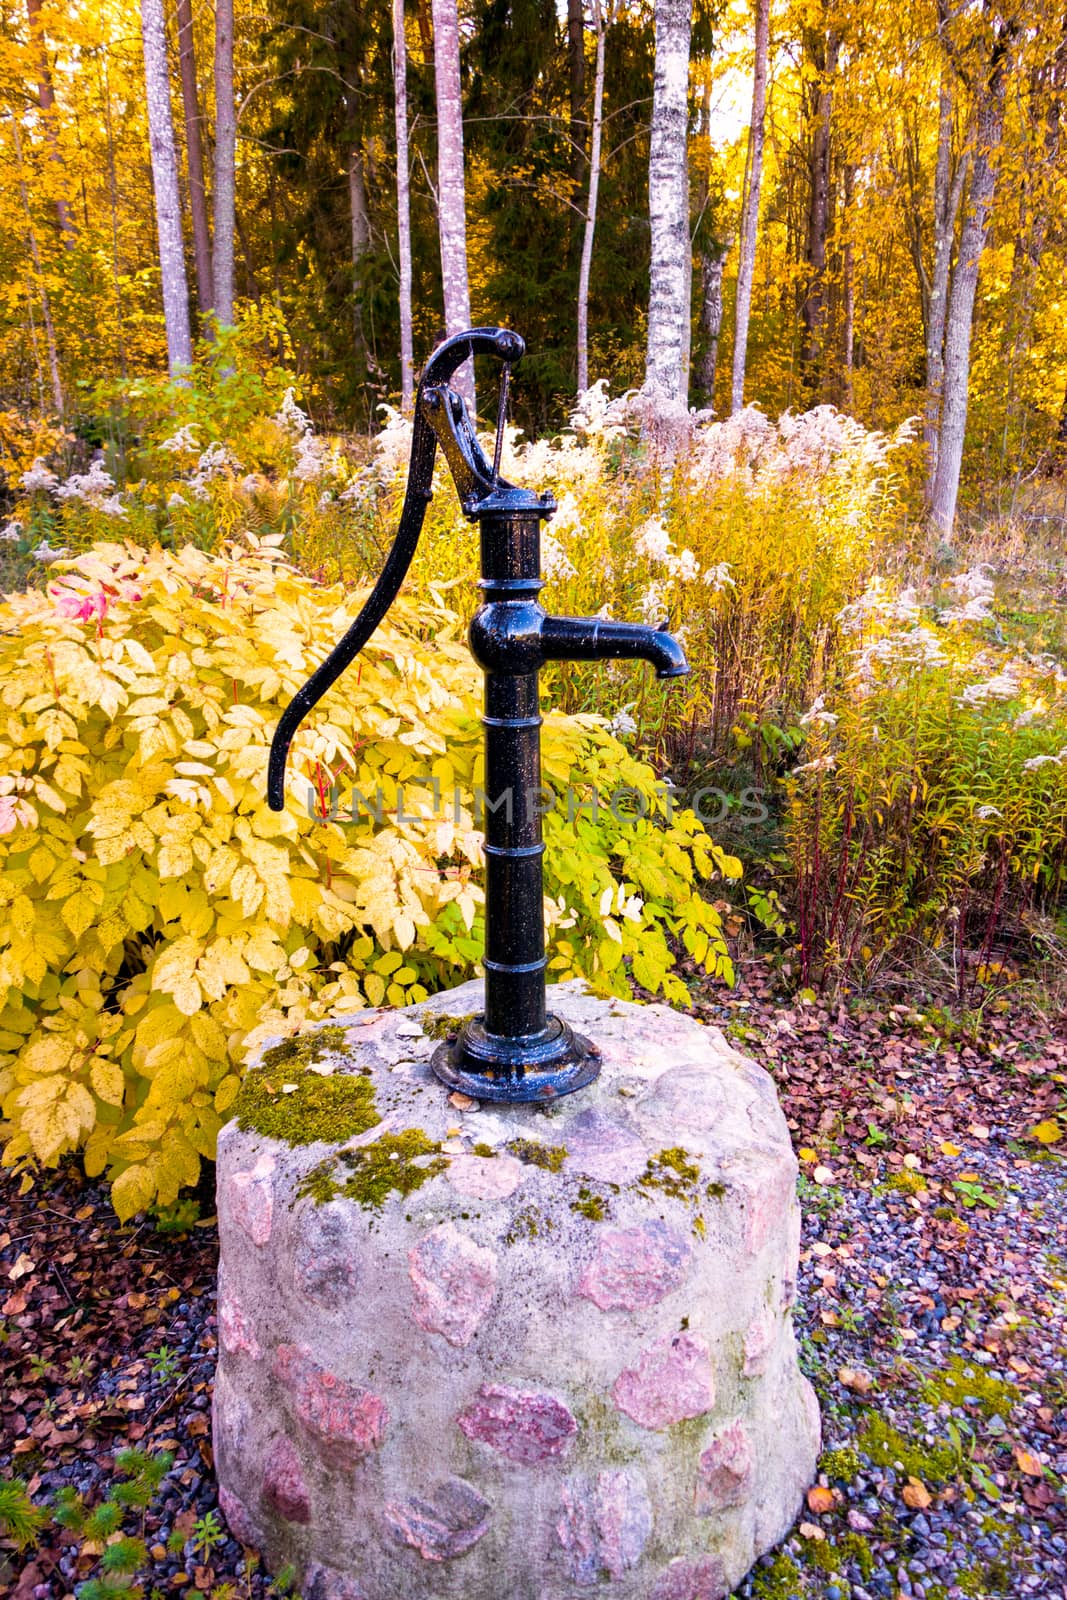 Water tap to an old well